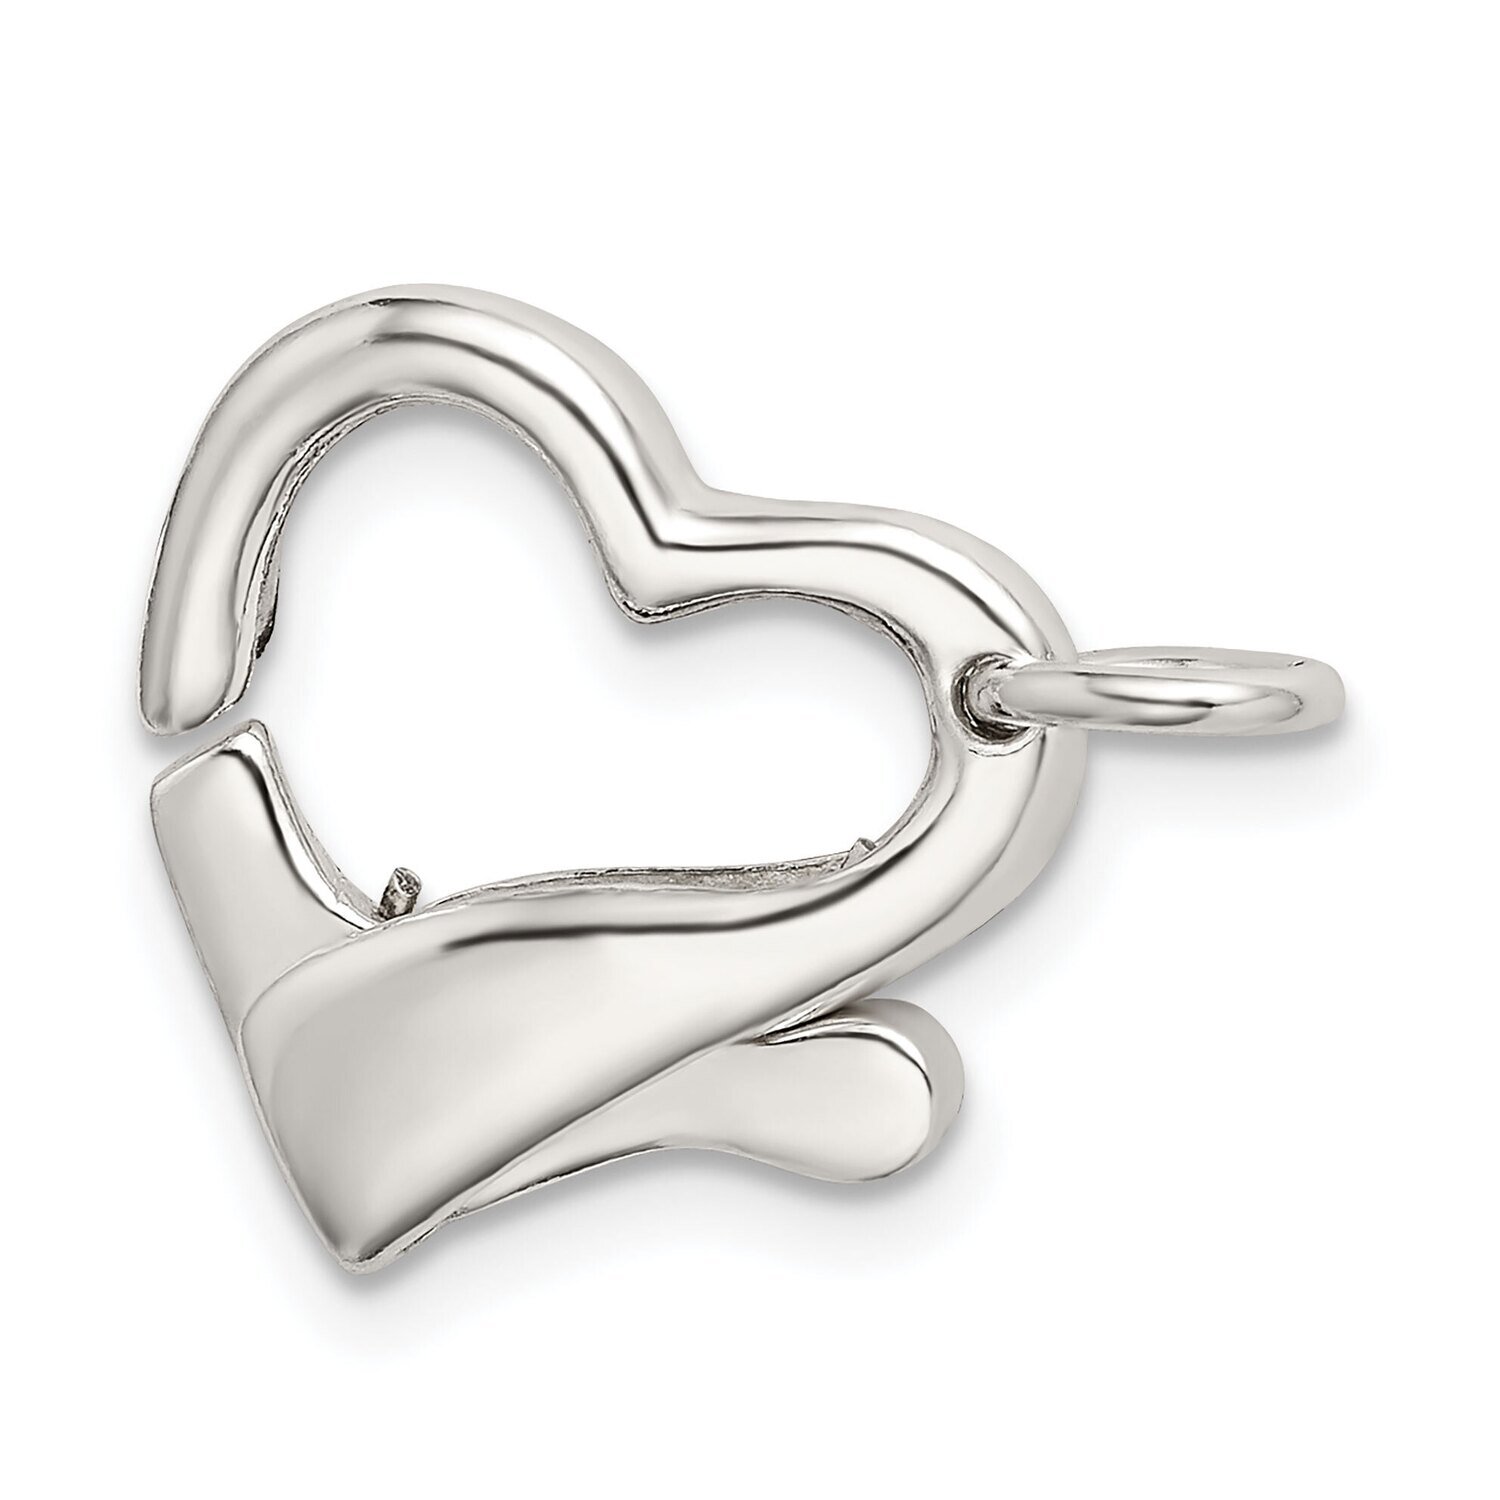 14.5 x 14.6mm Heart Shaped Lobster Clasp Sterling Silver SS3405